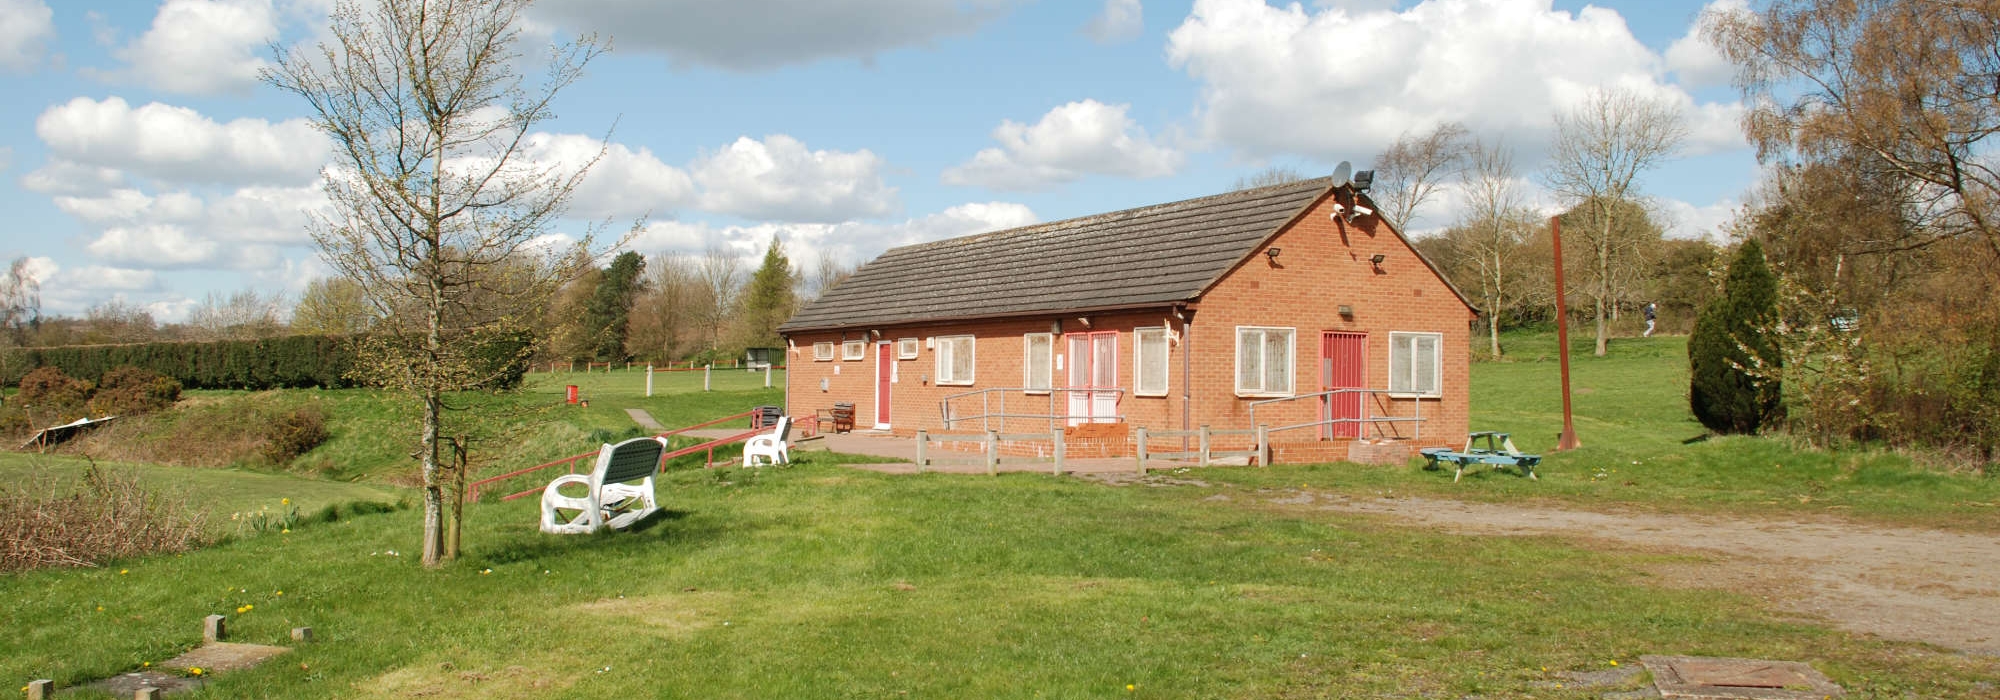 Sports Pavillion can be seen in the background, two white chairs are to the left of the pavillion